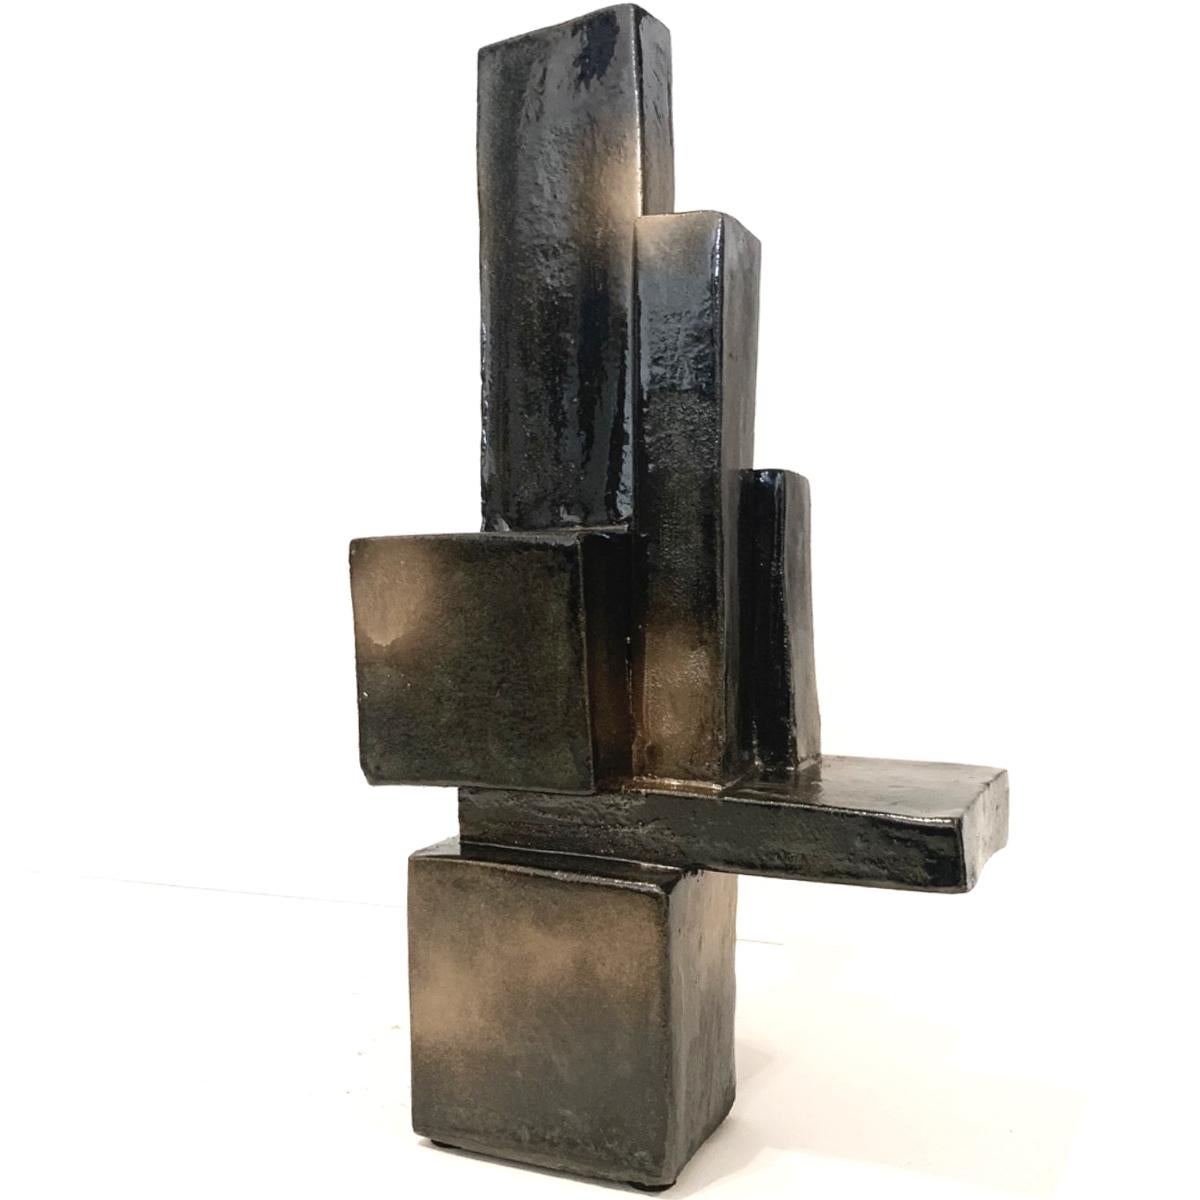 Architectural Ceramic Sculpture with Palladium and Gold Glaze by Judy Engel 1